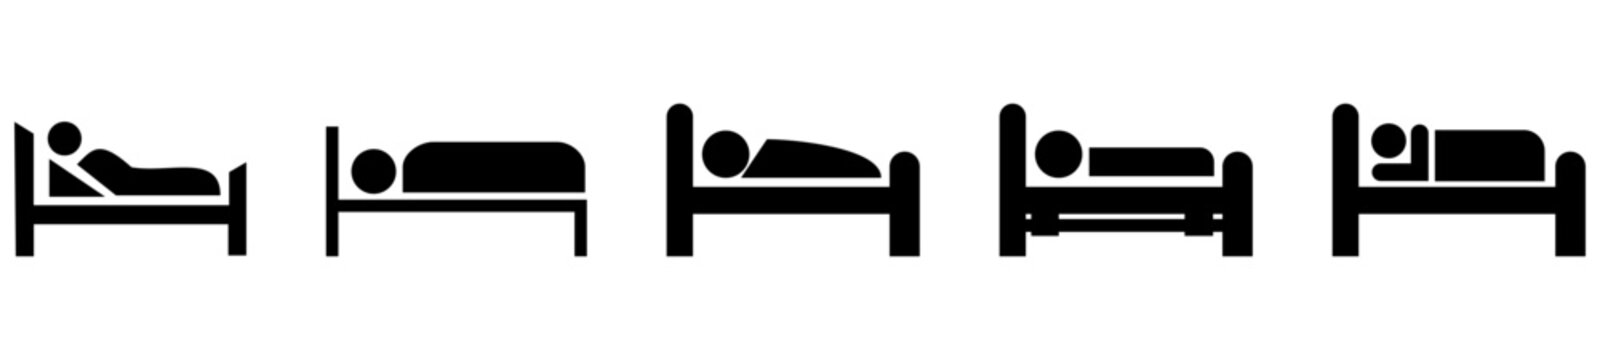 Human in bed. flat simple icon Vector. Simple flat symbol. Illustration pictogram